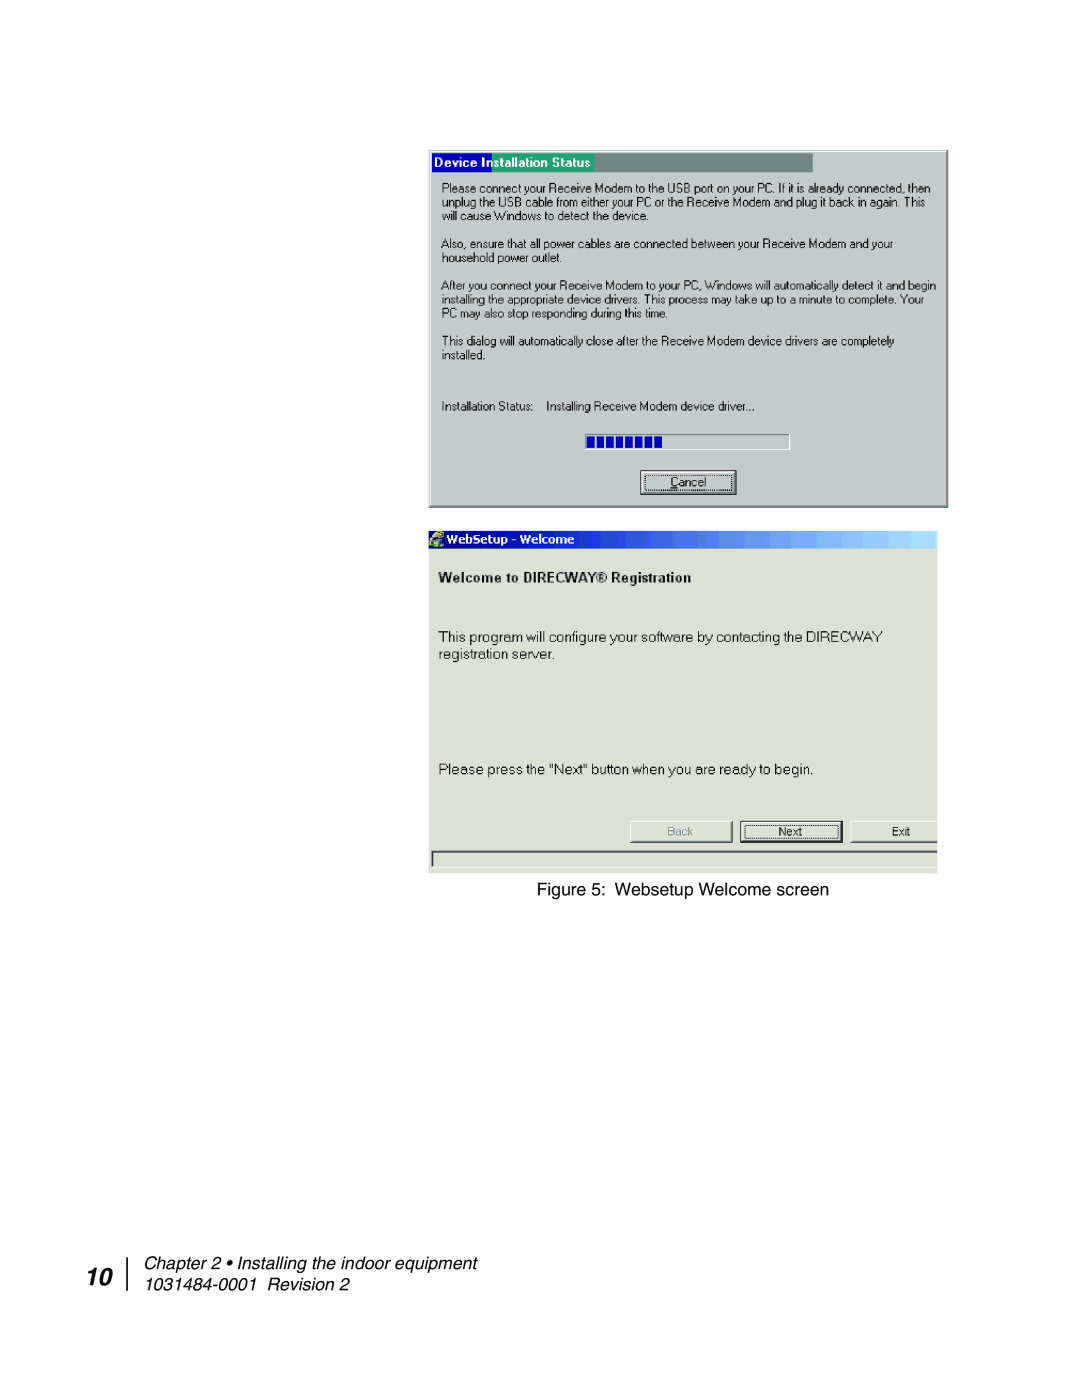 Hughes DW4020 Device Installation Status, Websetup Welcome screen, Installing the indoor equipment 1031484-0001 Revision 